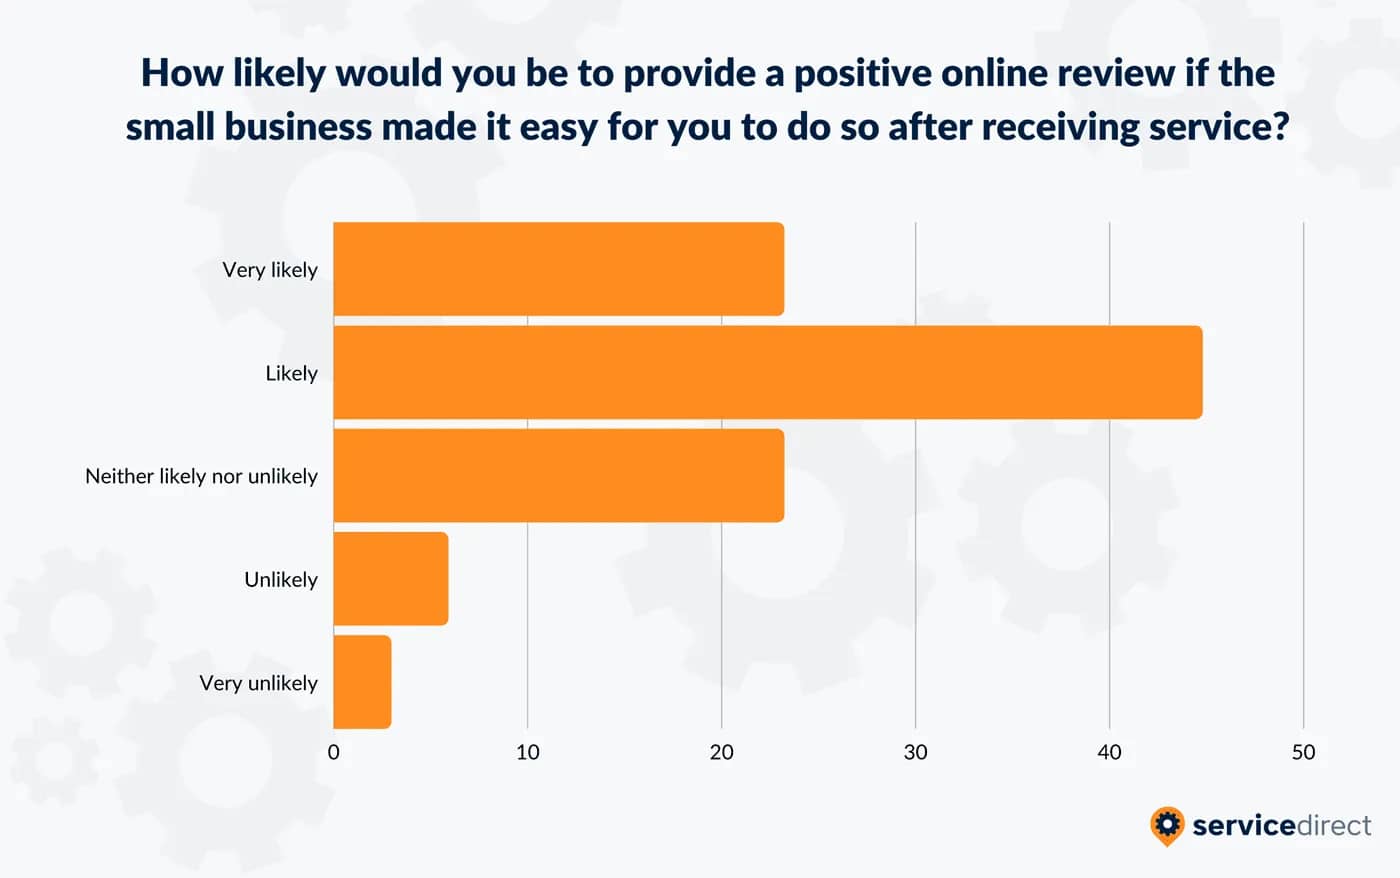 71% of consumers are likely to leave a review if a company makes it easy for them to do so. 